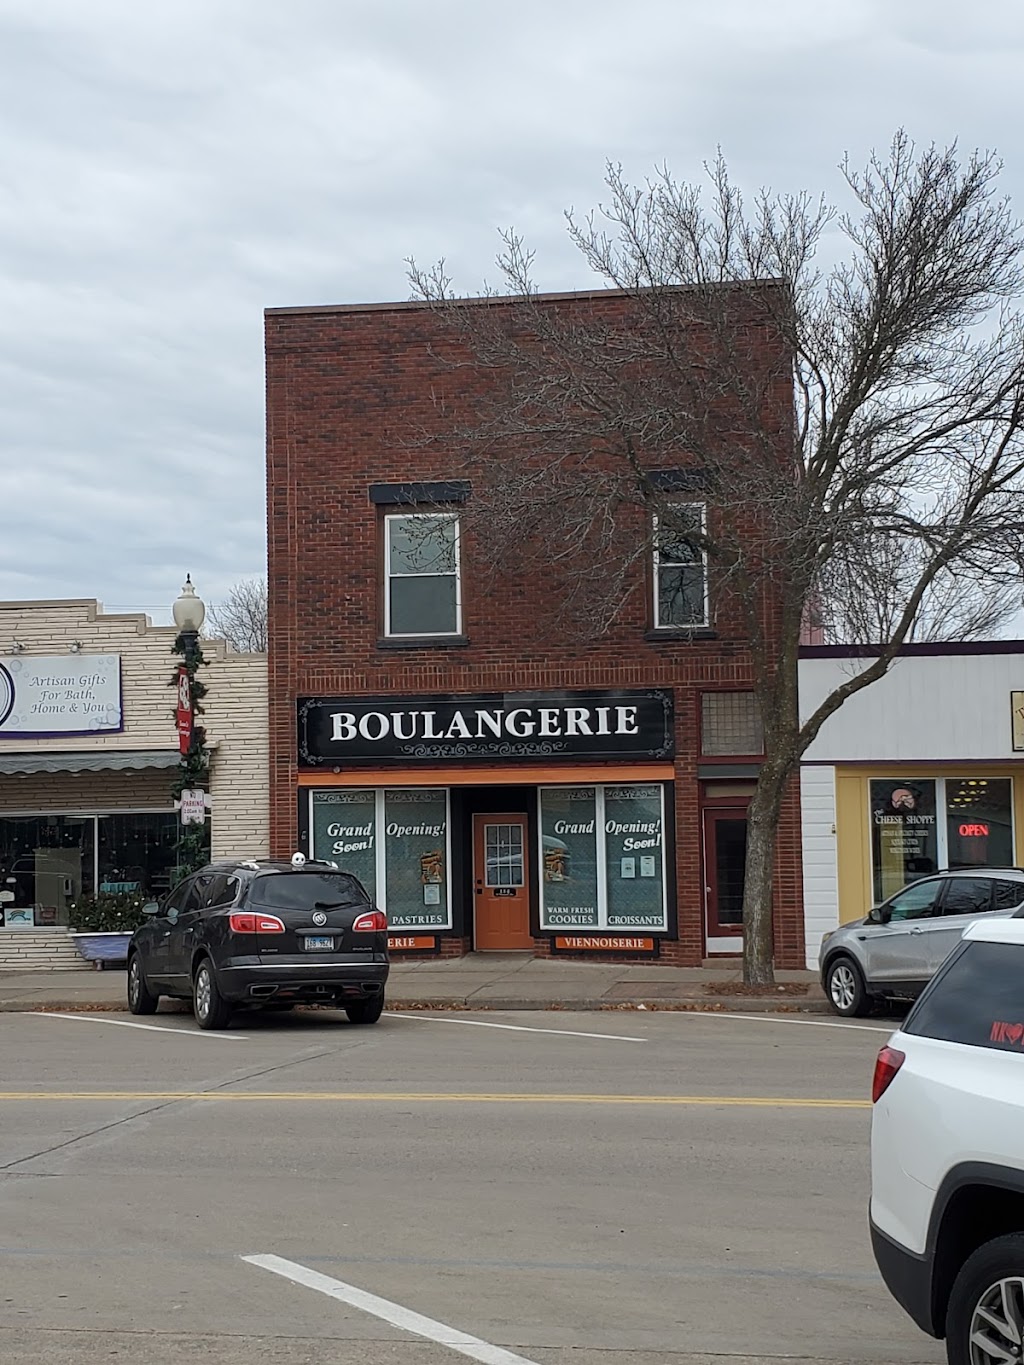 Boulangerie | restaurant | 114 W Wisconsin Ave, Tomahawk, WI 54487, USA | 7152243438 OR +1 715-224-3438